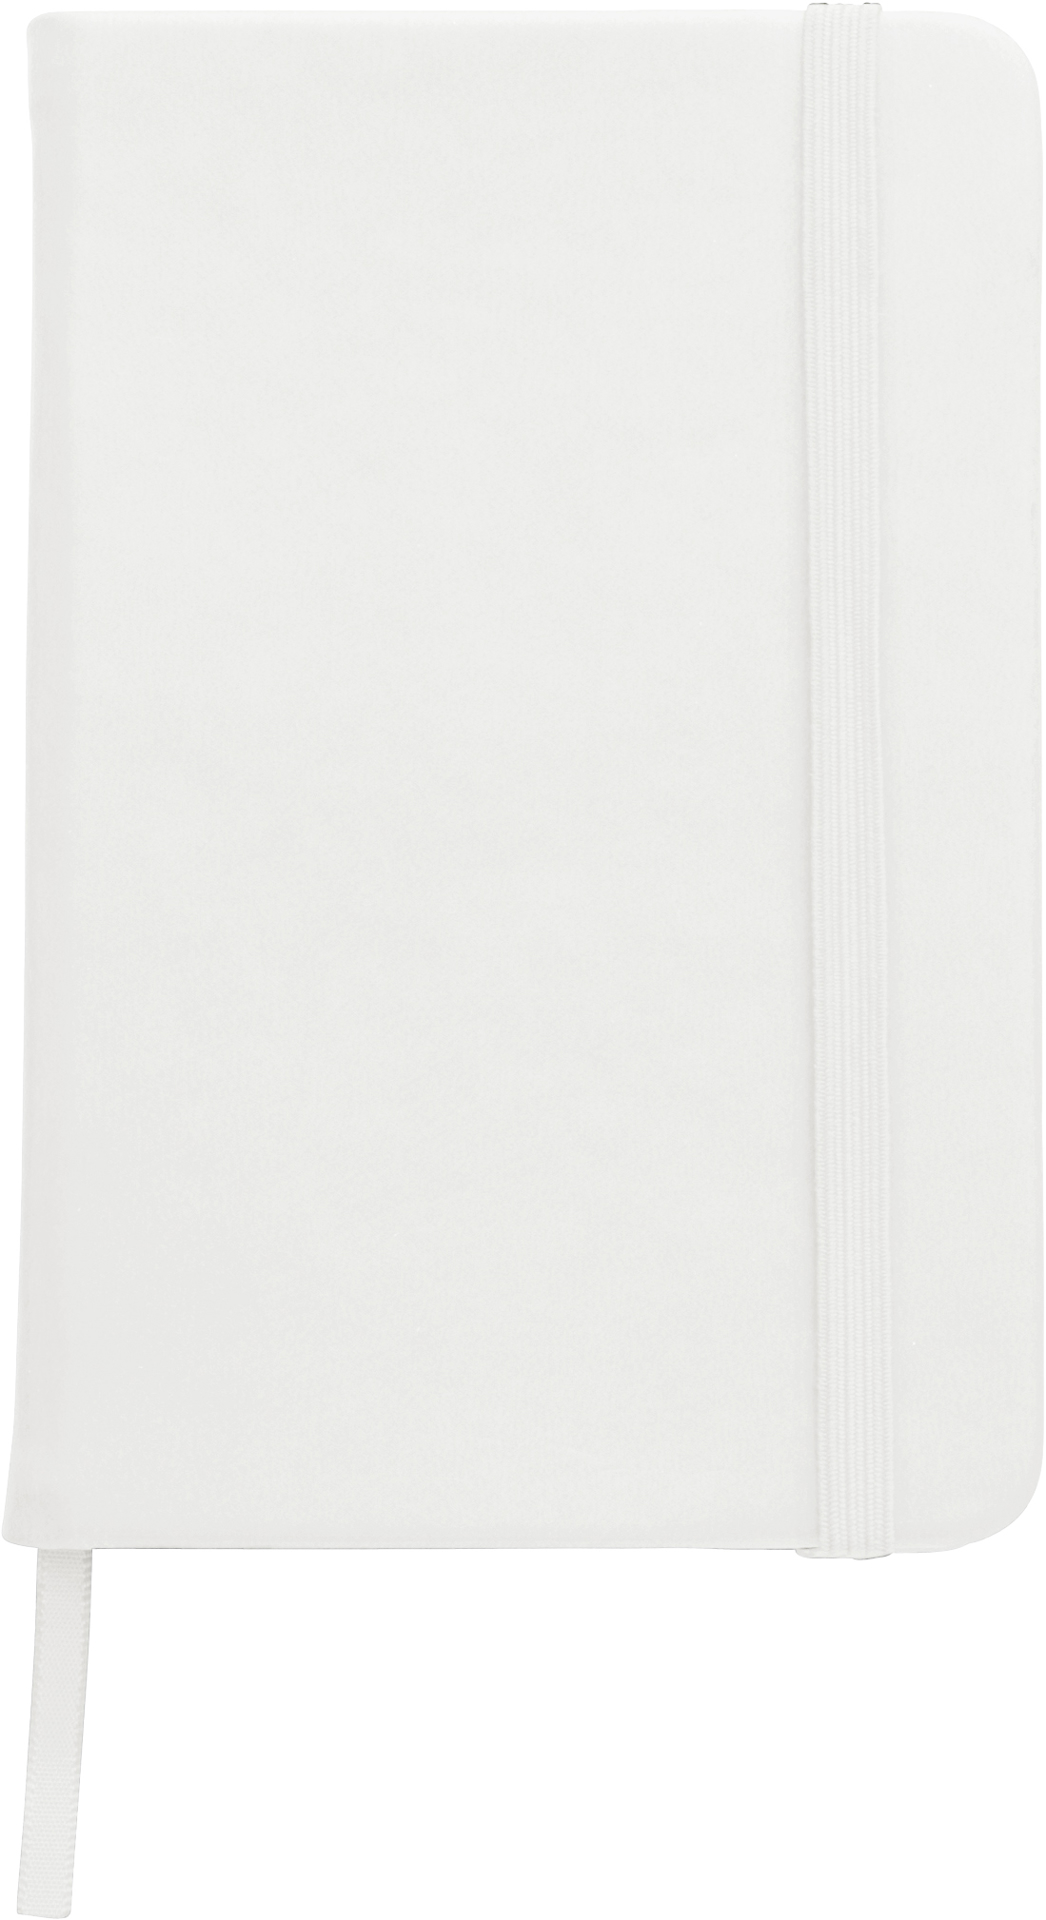 A6 Notebook with soft PU cover in white